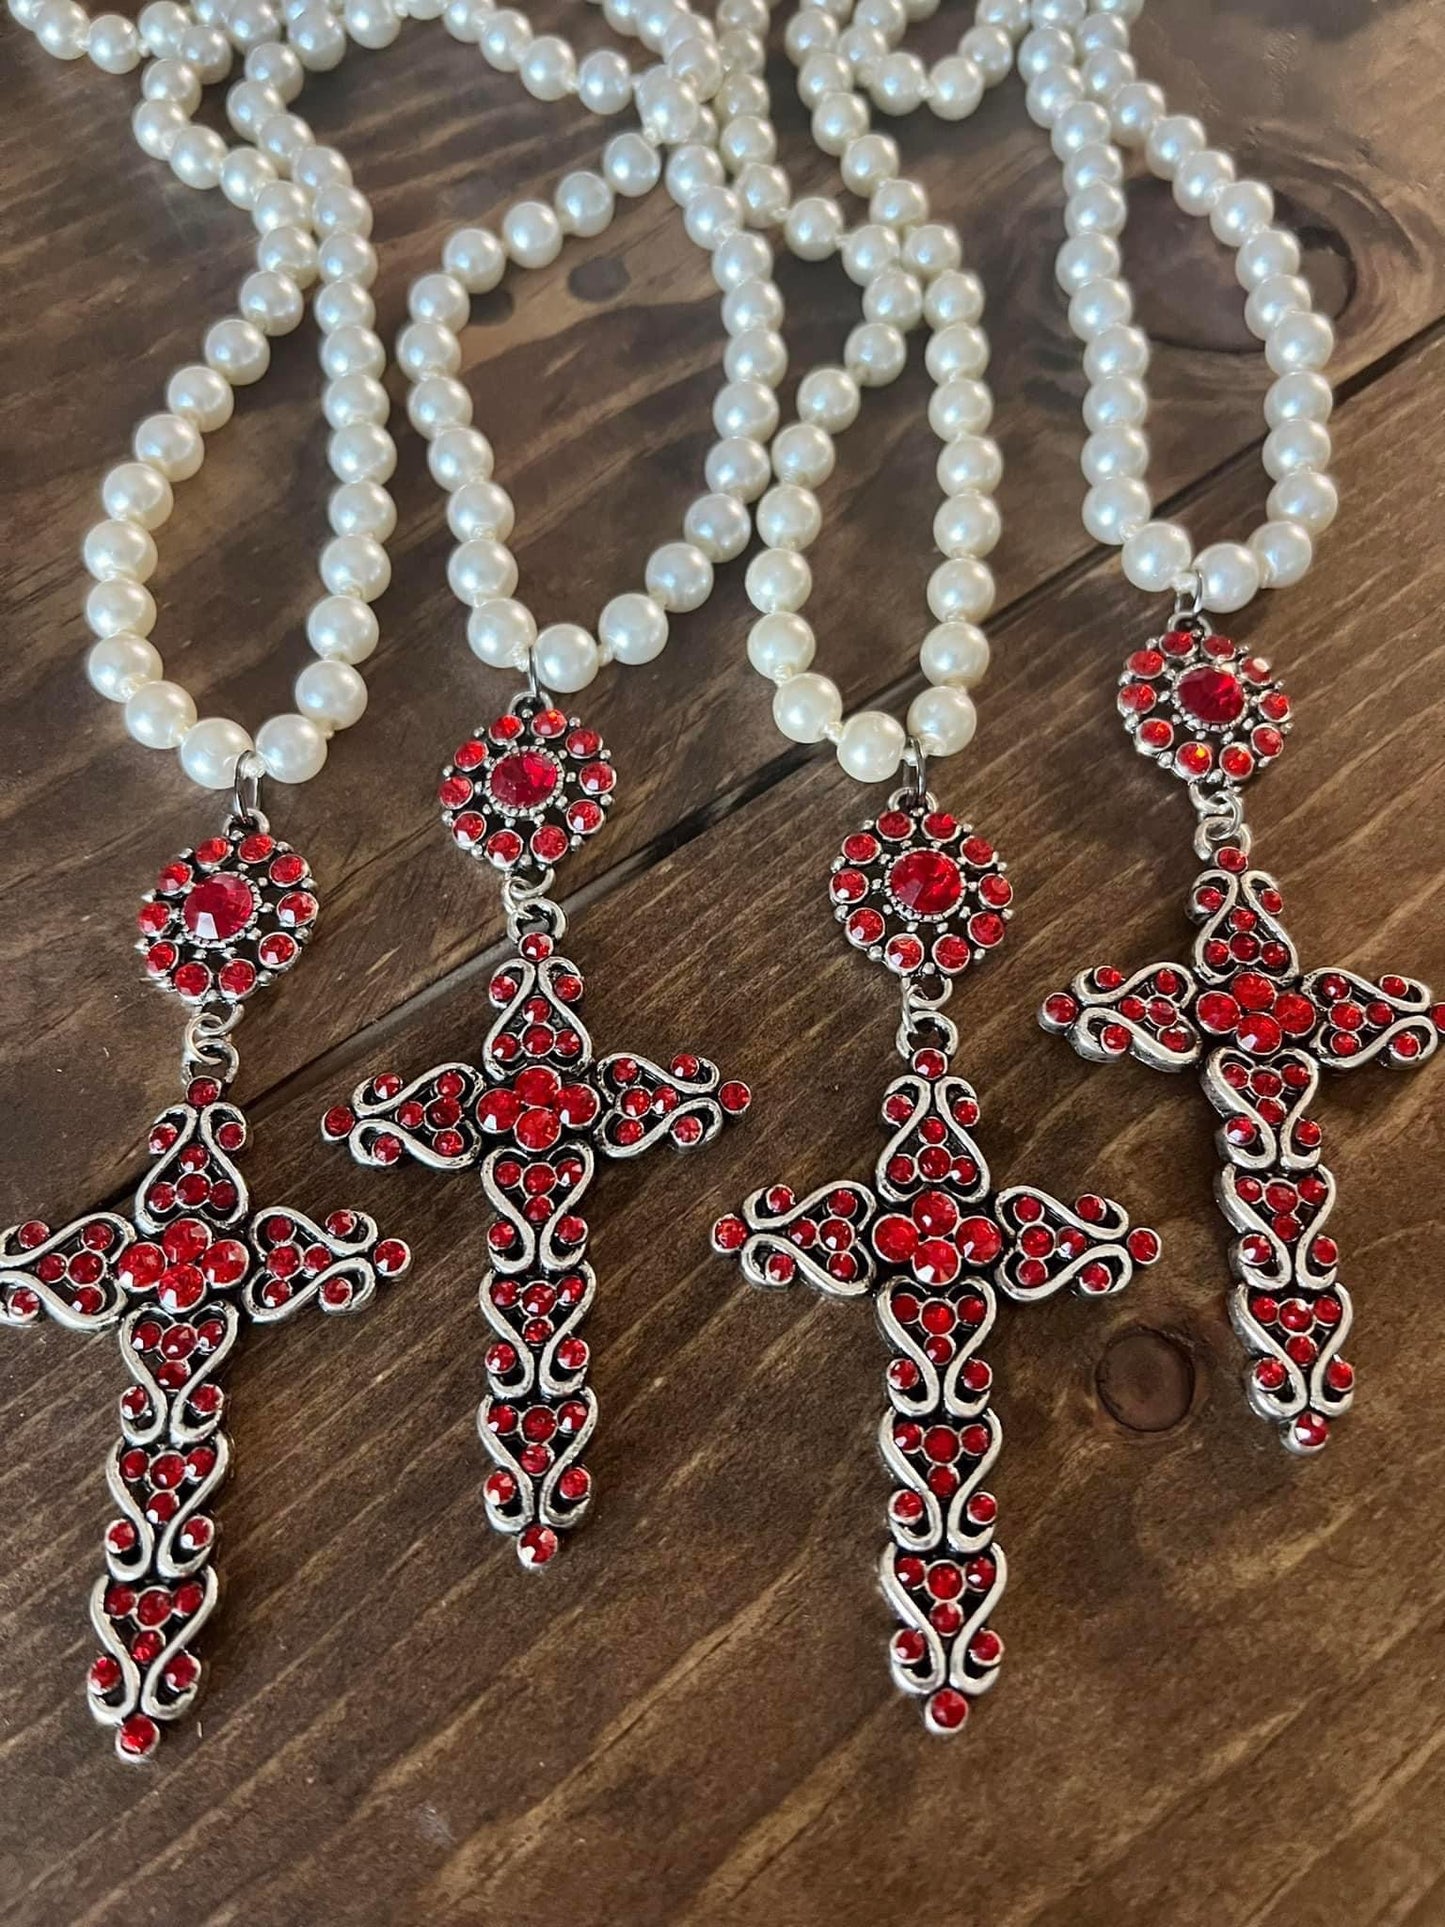 Gorgeous ruby cross pearl necklace